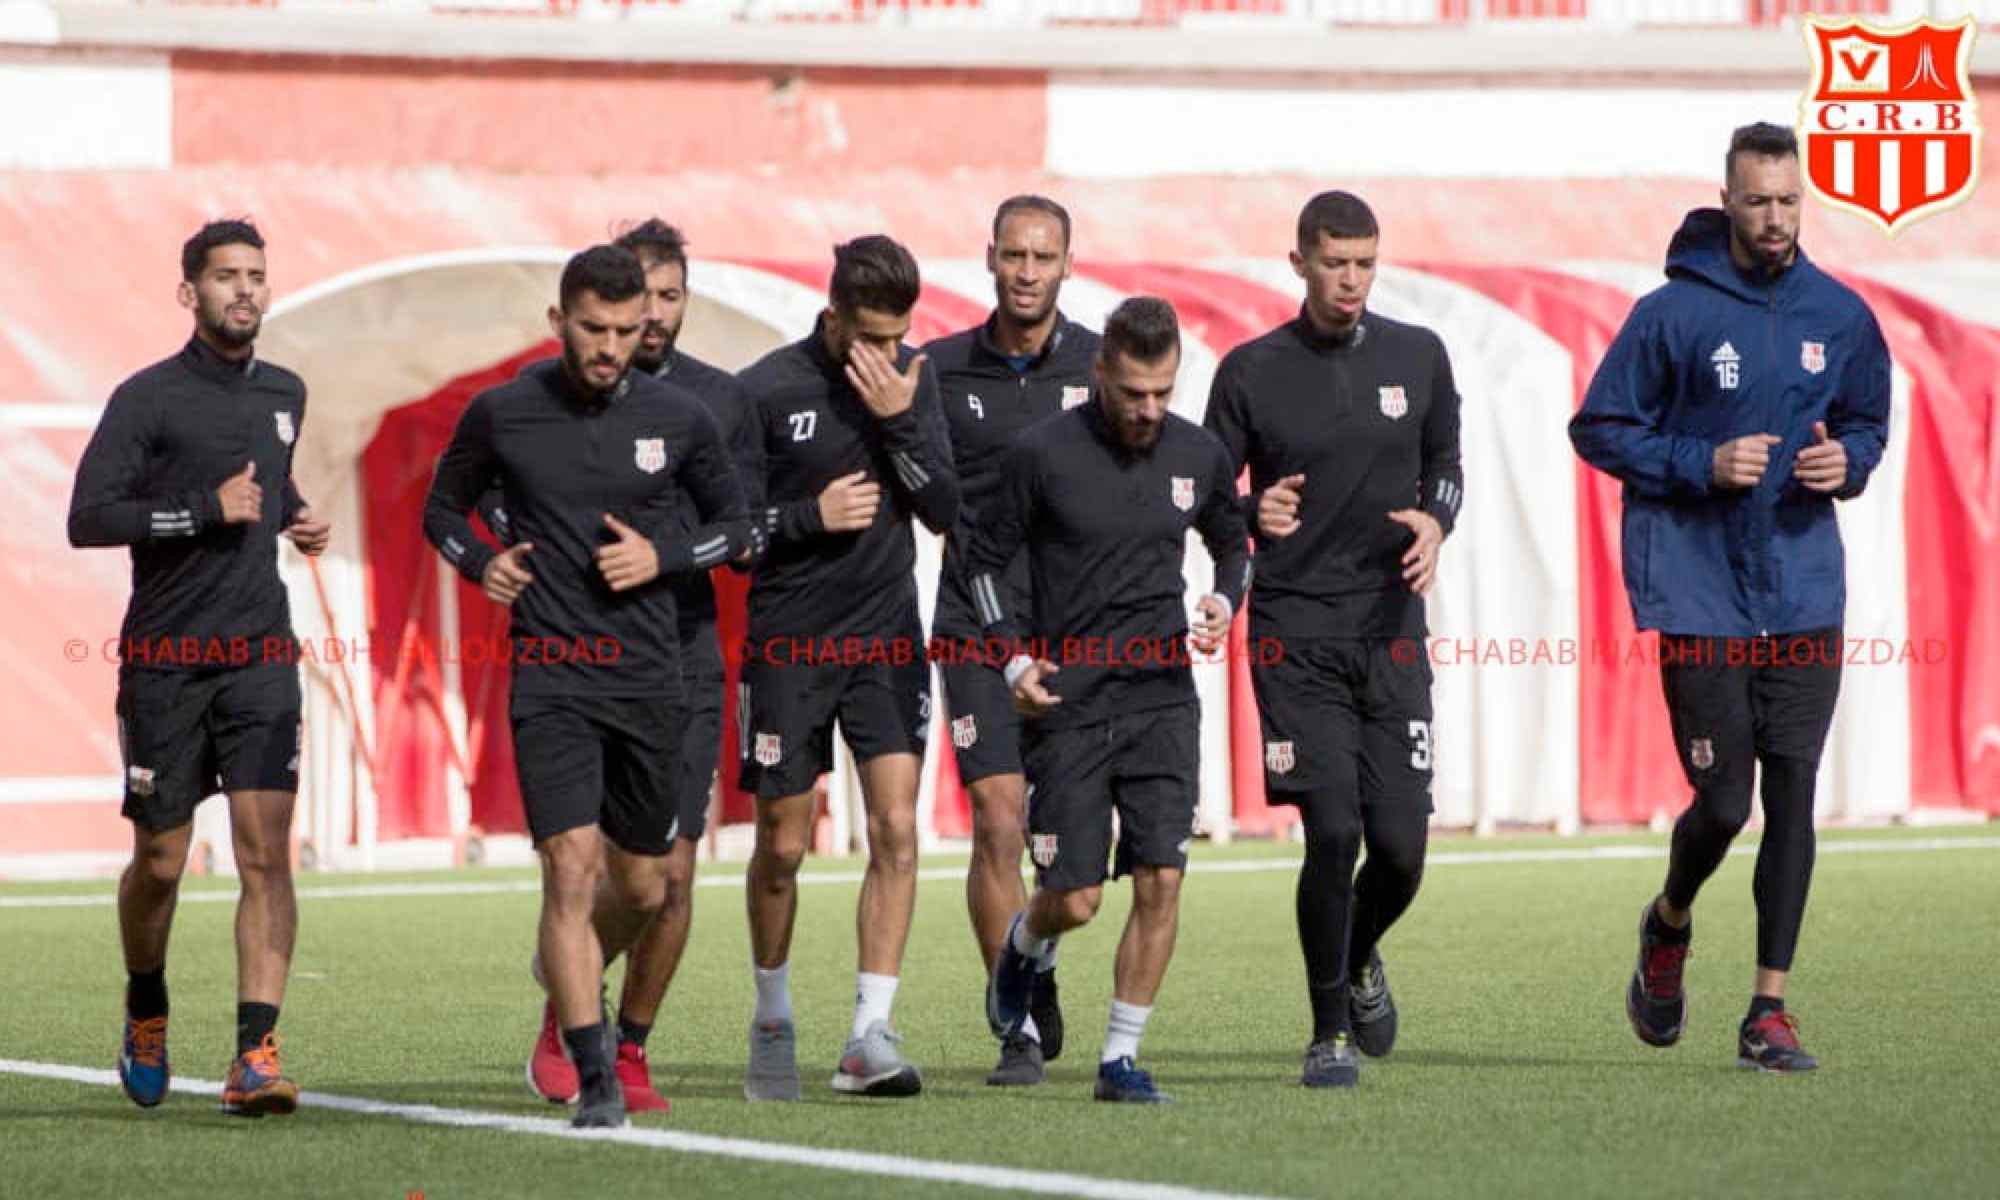 sayoud groupe chabab entrainement crb